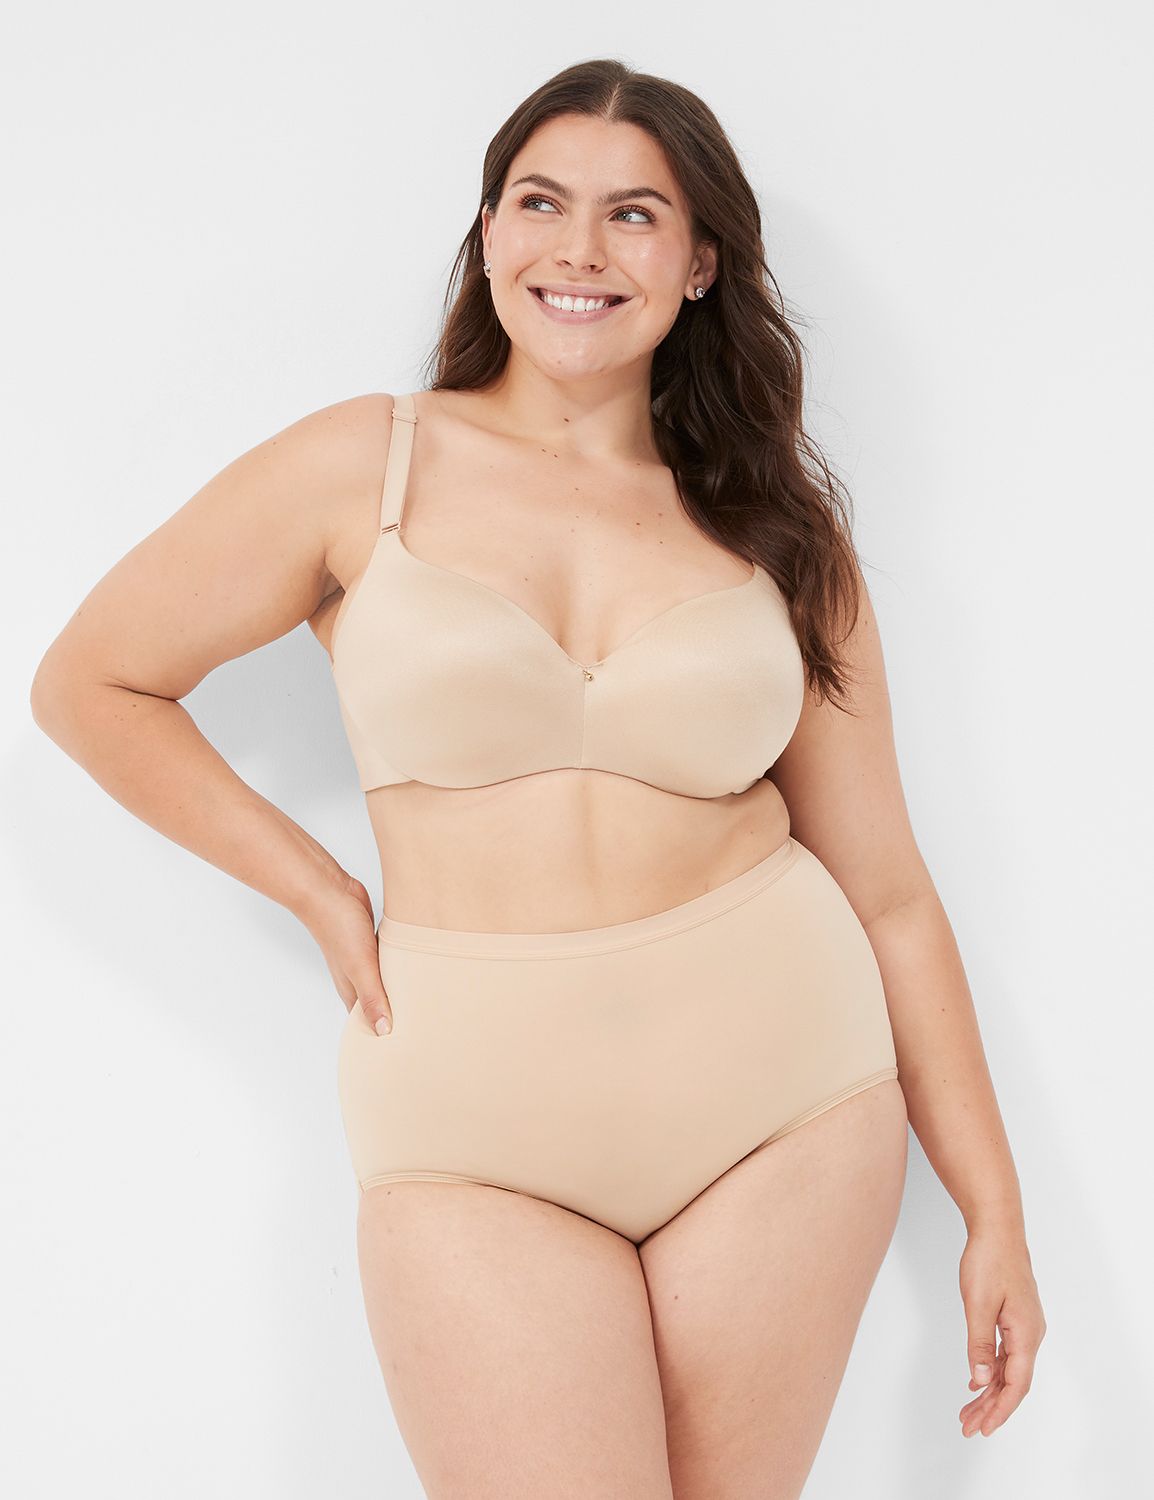 bra,Because sometimes it's what you don't see that matters most, our Invisible Backsmoother balconette keeps you smooth from every angle -- no bumps, lines or unflattering peeks. 